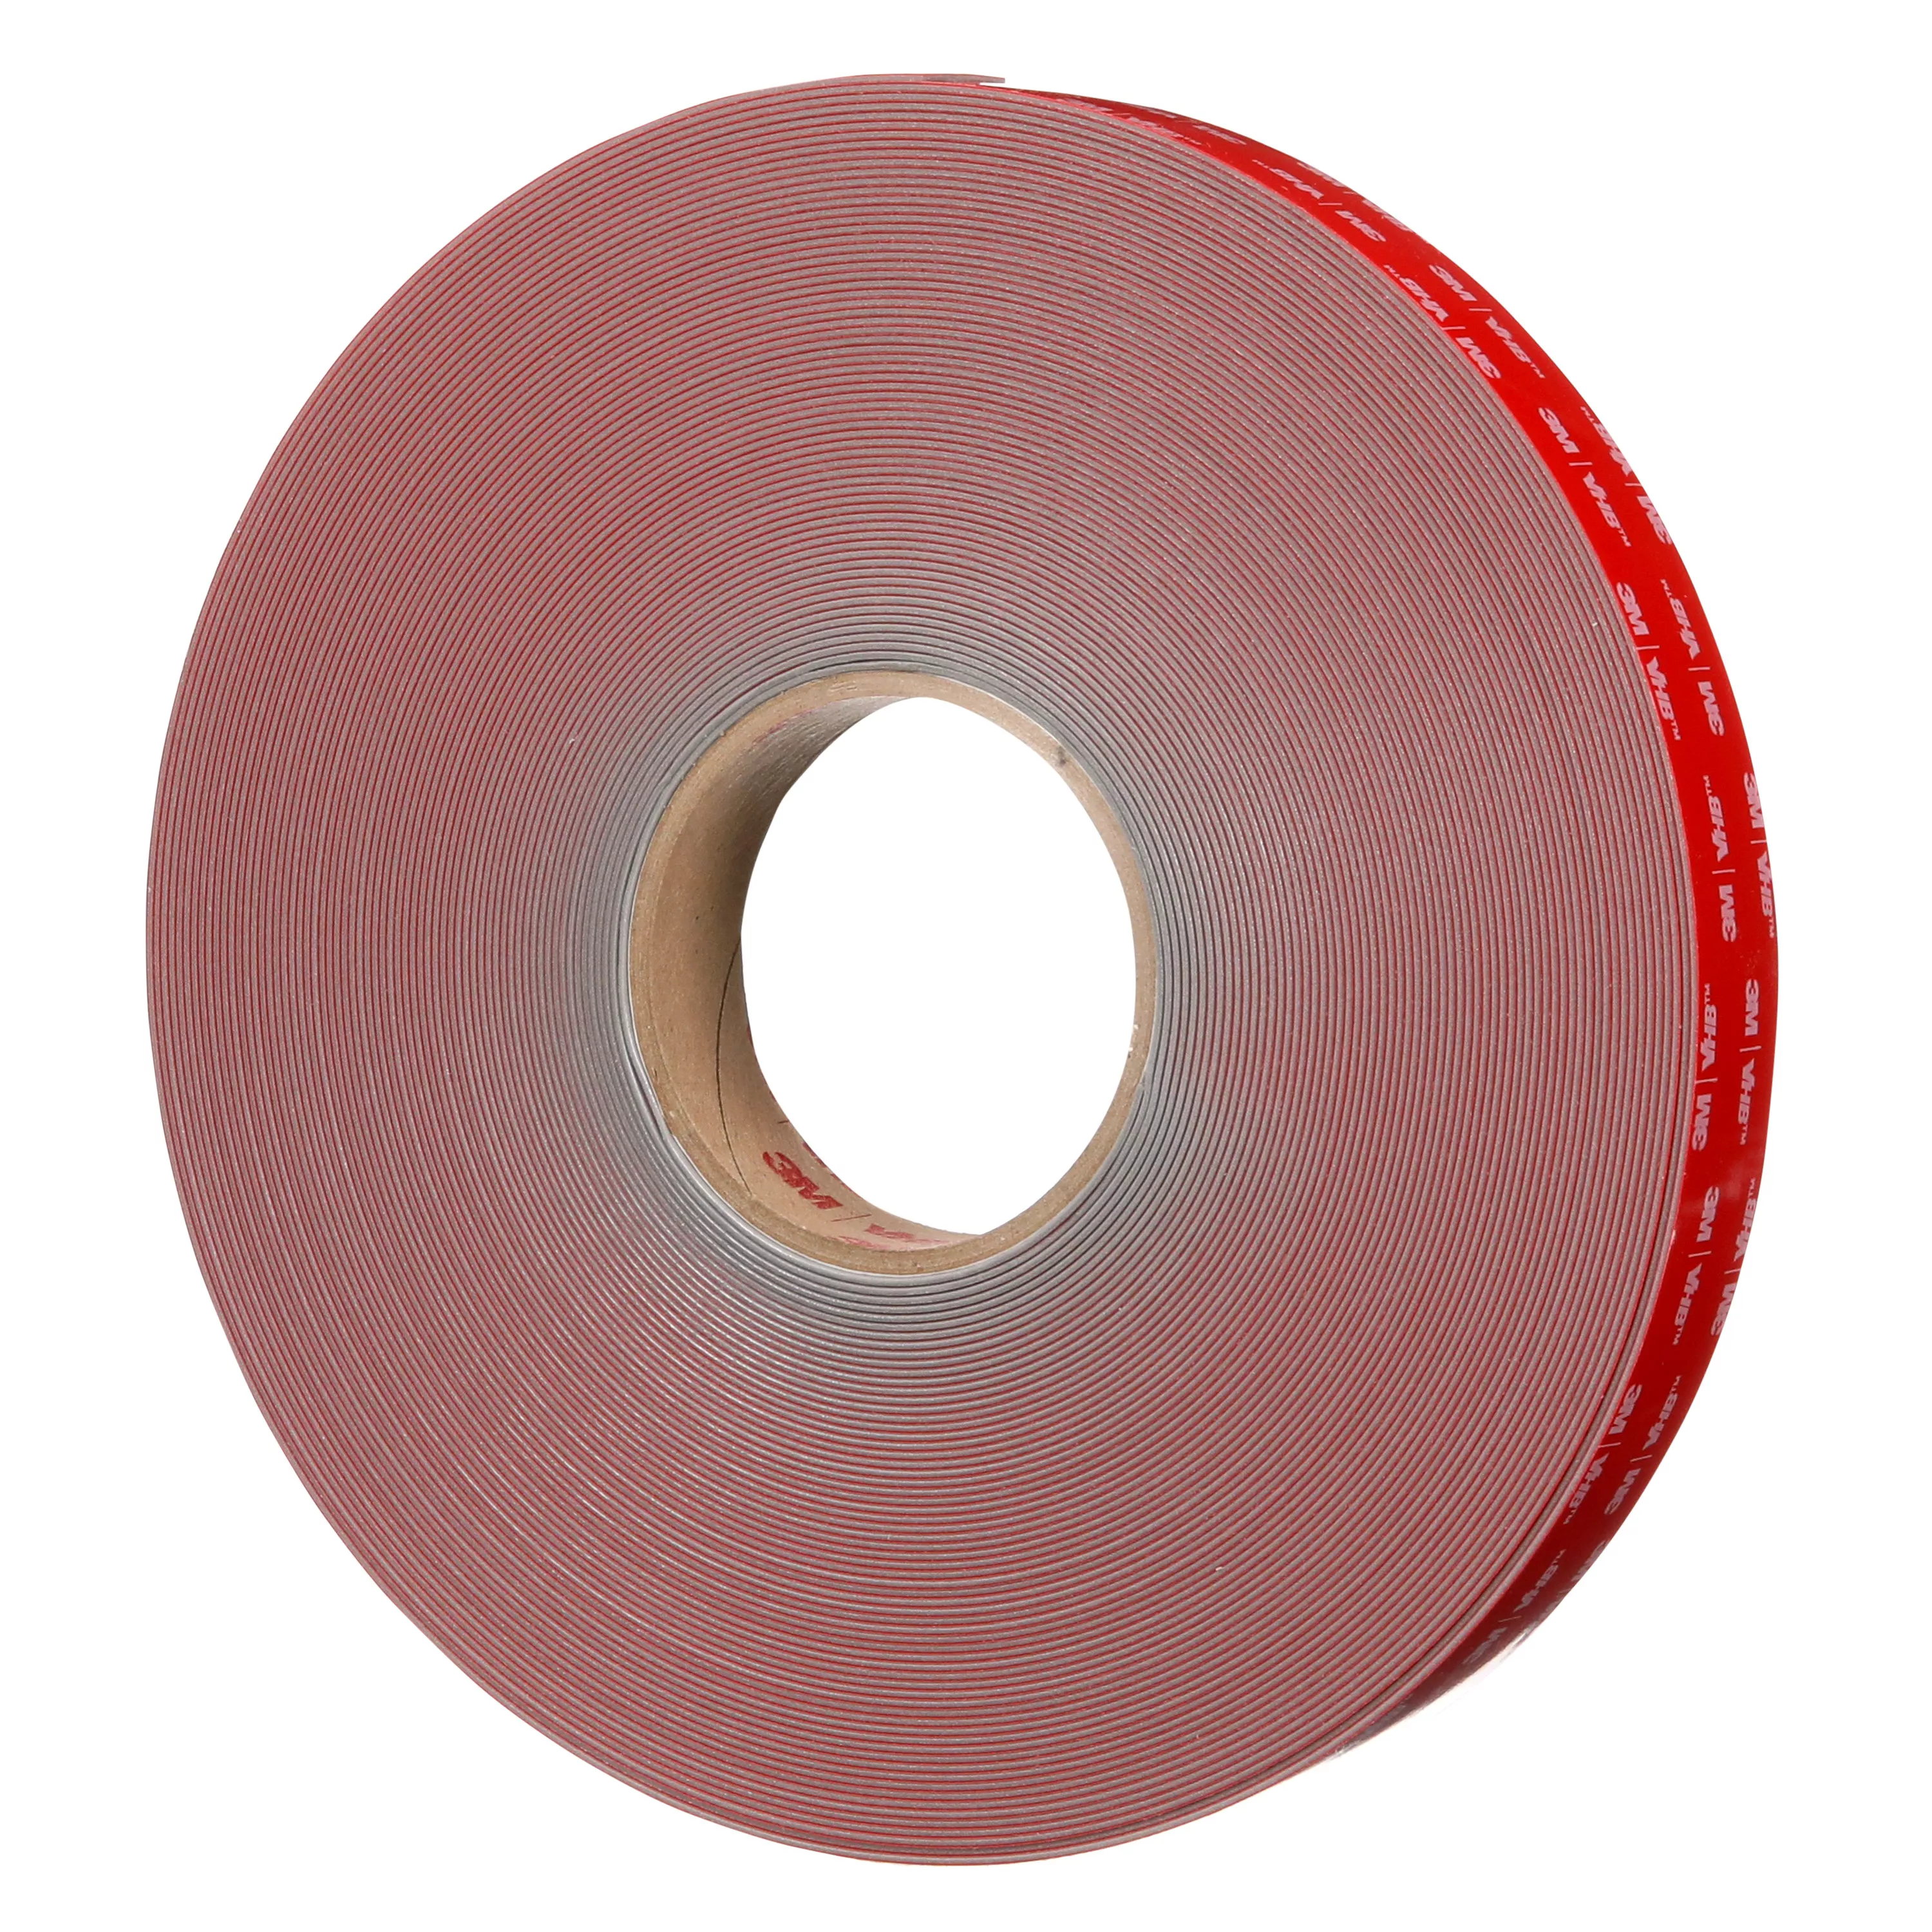 Product Number RP+080GF | 3M™ VHB™ Tape RP+080GF